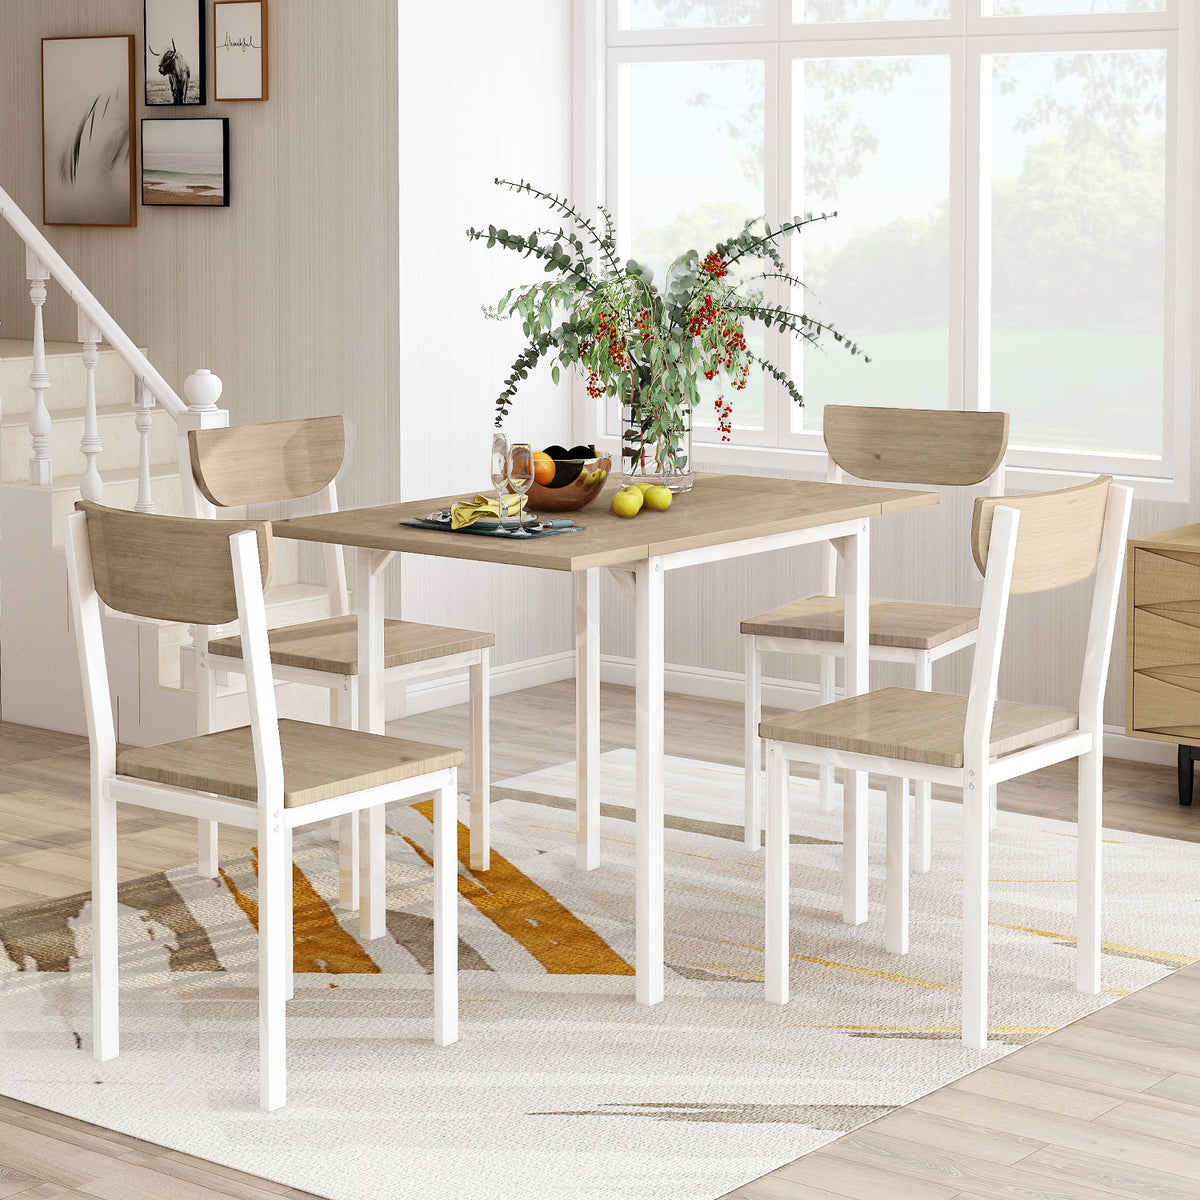 5-piece Modern Metal Dining Set with 1 Leaf Dining Table and 4 chairs - Oak Finish